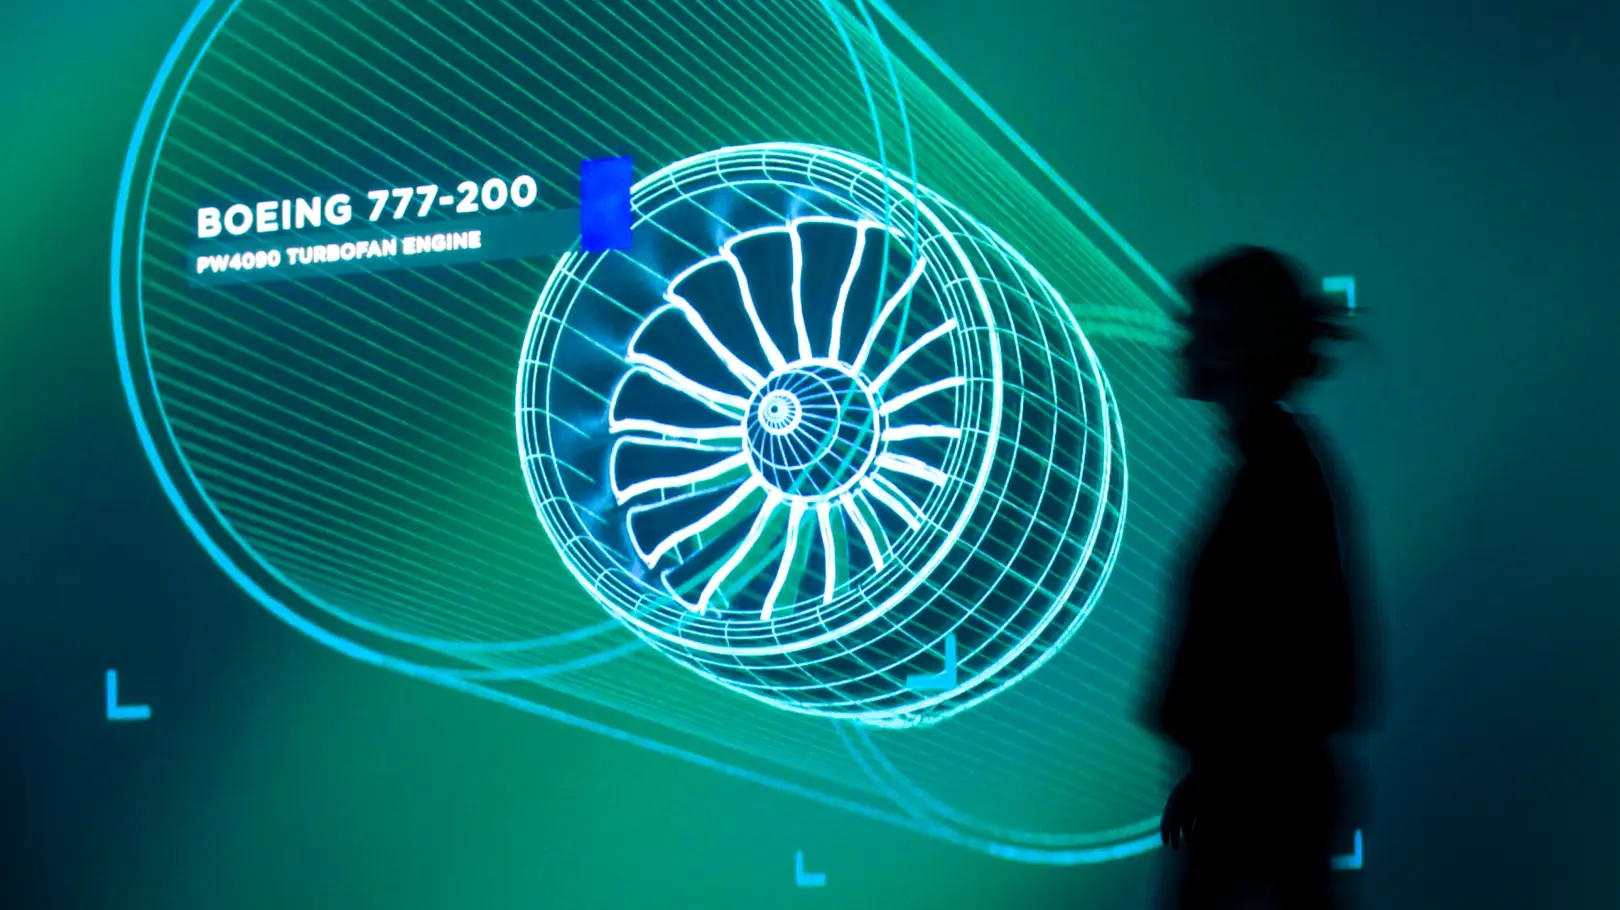 Woman in silhouette in front of a large green glowing image of an airplane engine CAD drawing